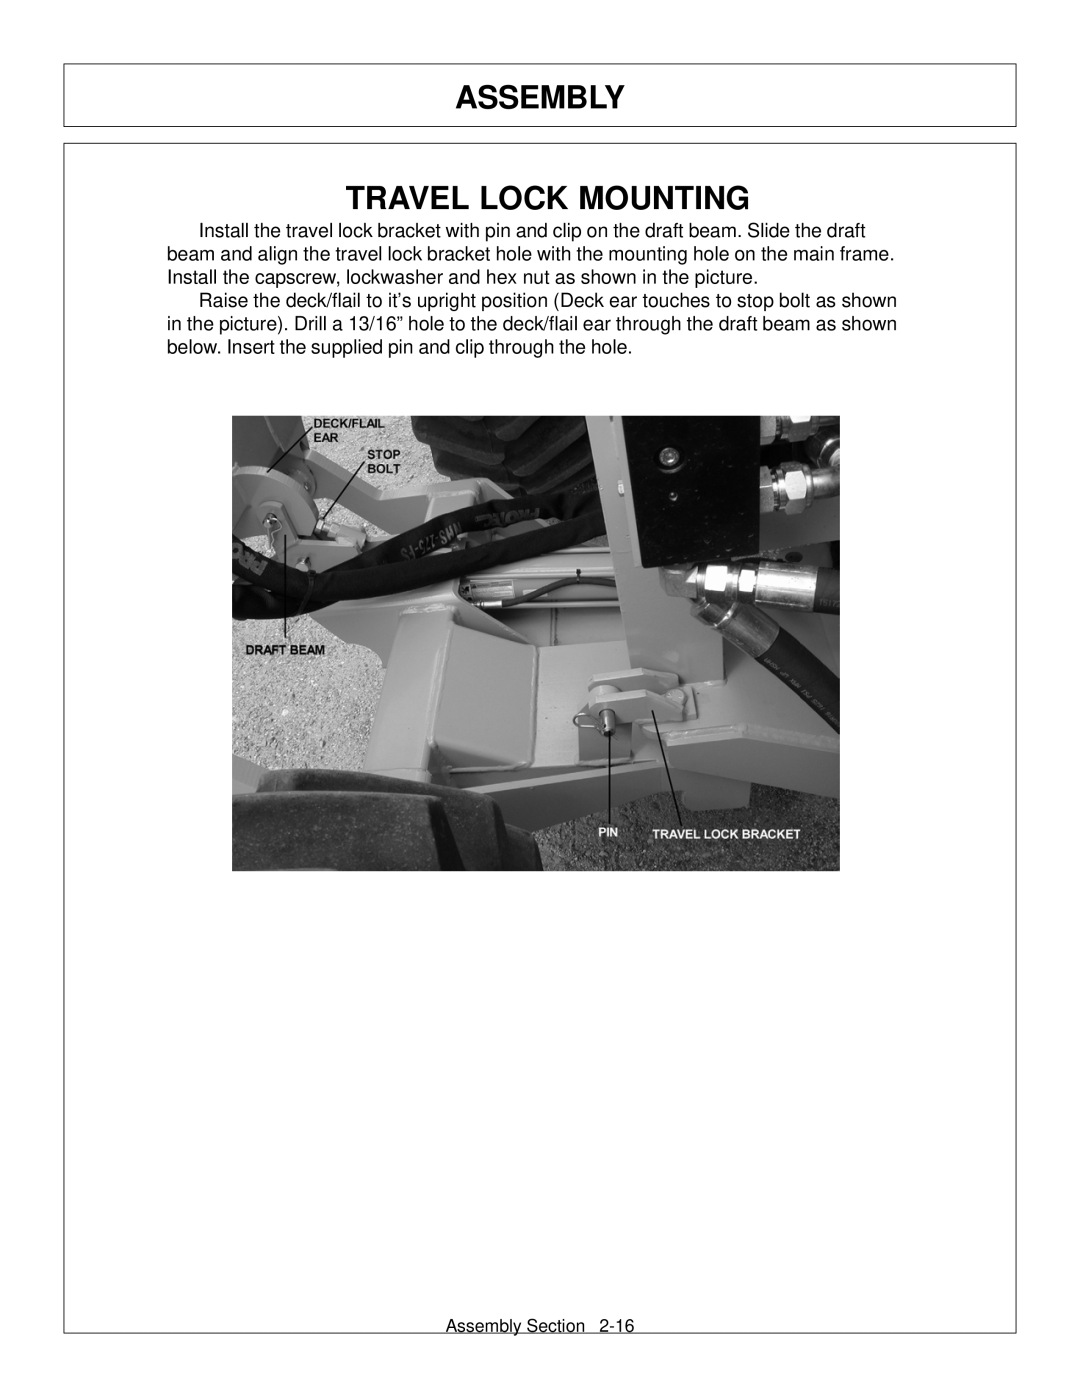 Tiger Products Co., Ltd TS 100A manual Travel Lock Mounting, Assembly 